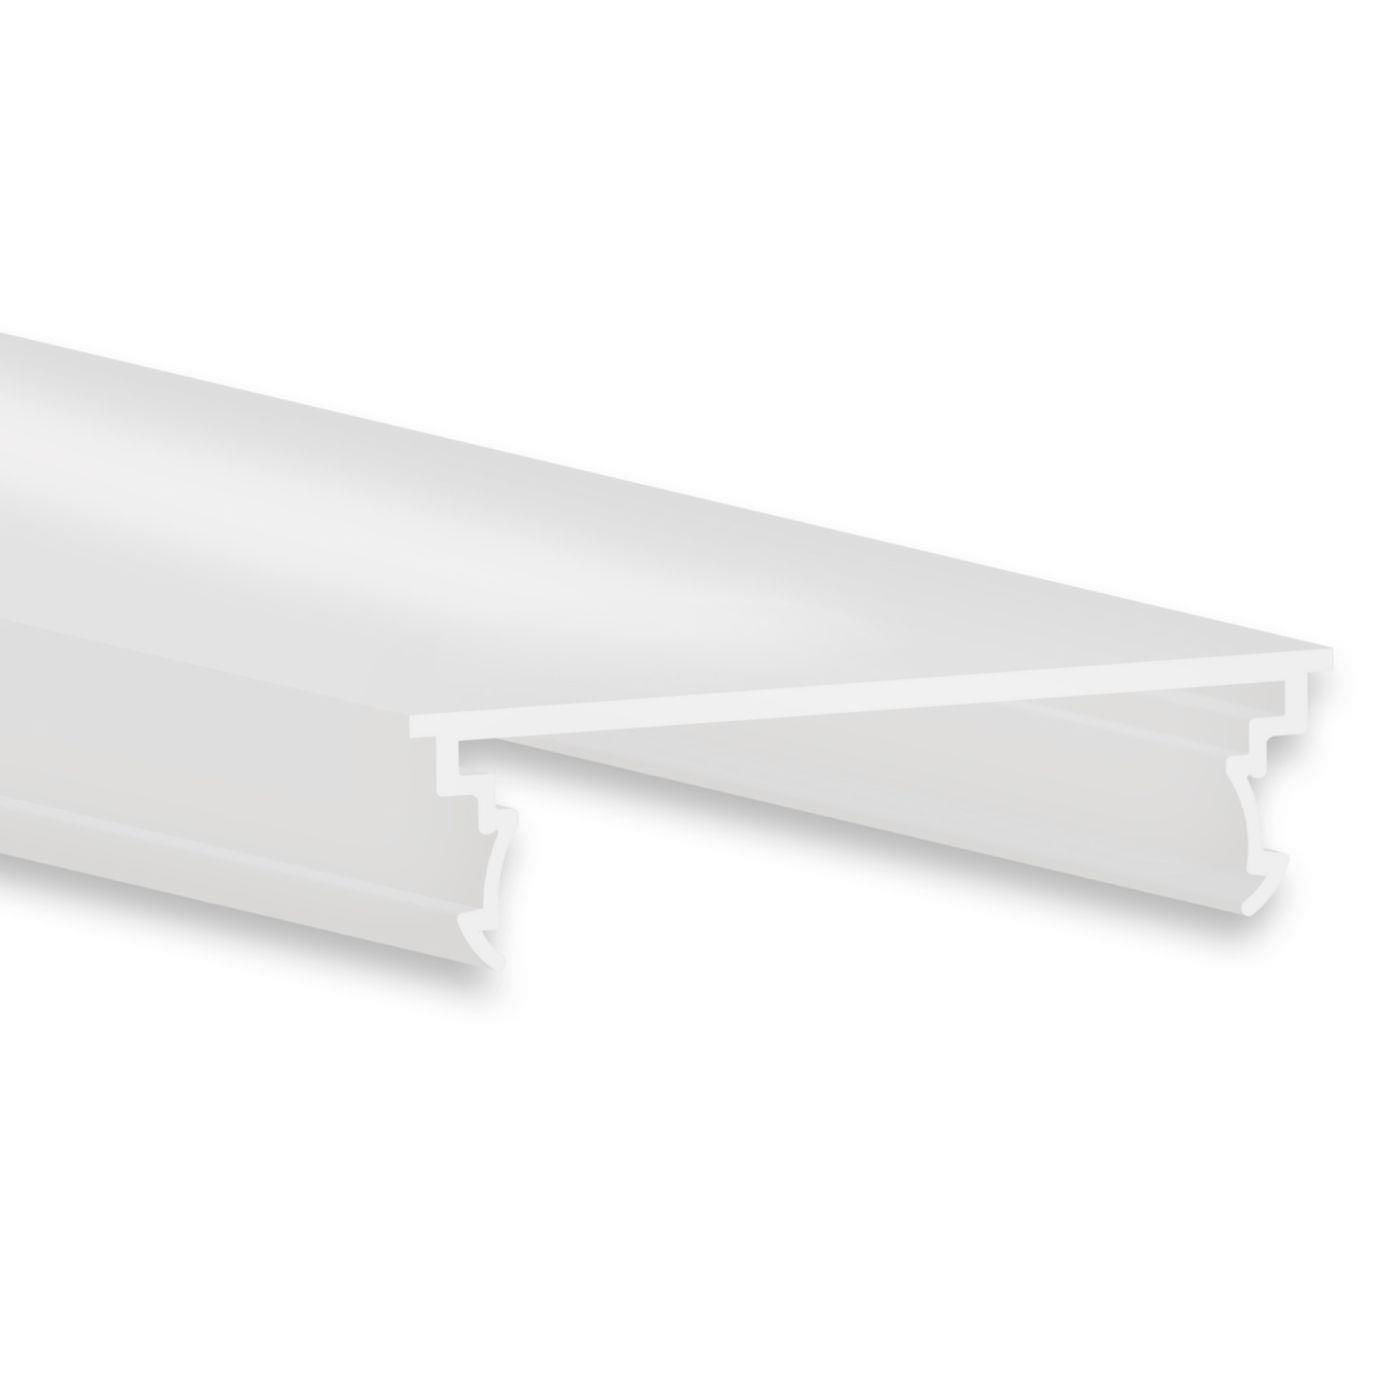 2m Cover C38 for people profile LL2.1 15,2x60mm Plastic